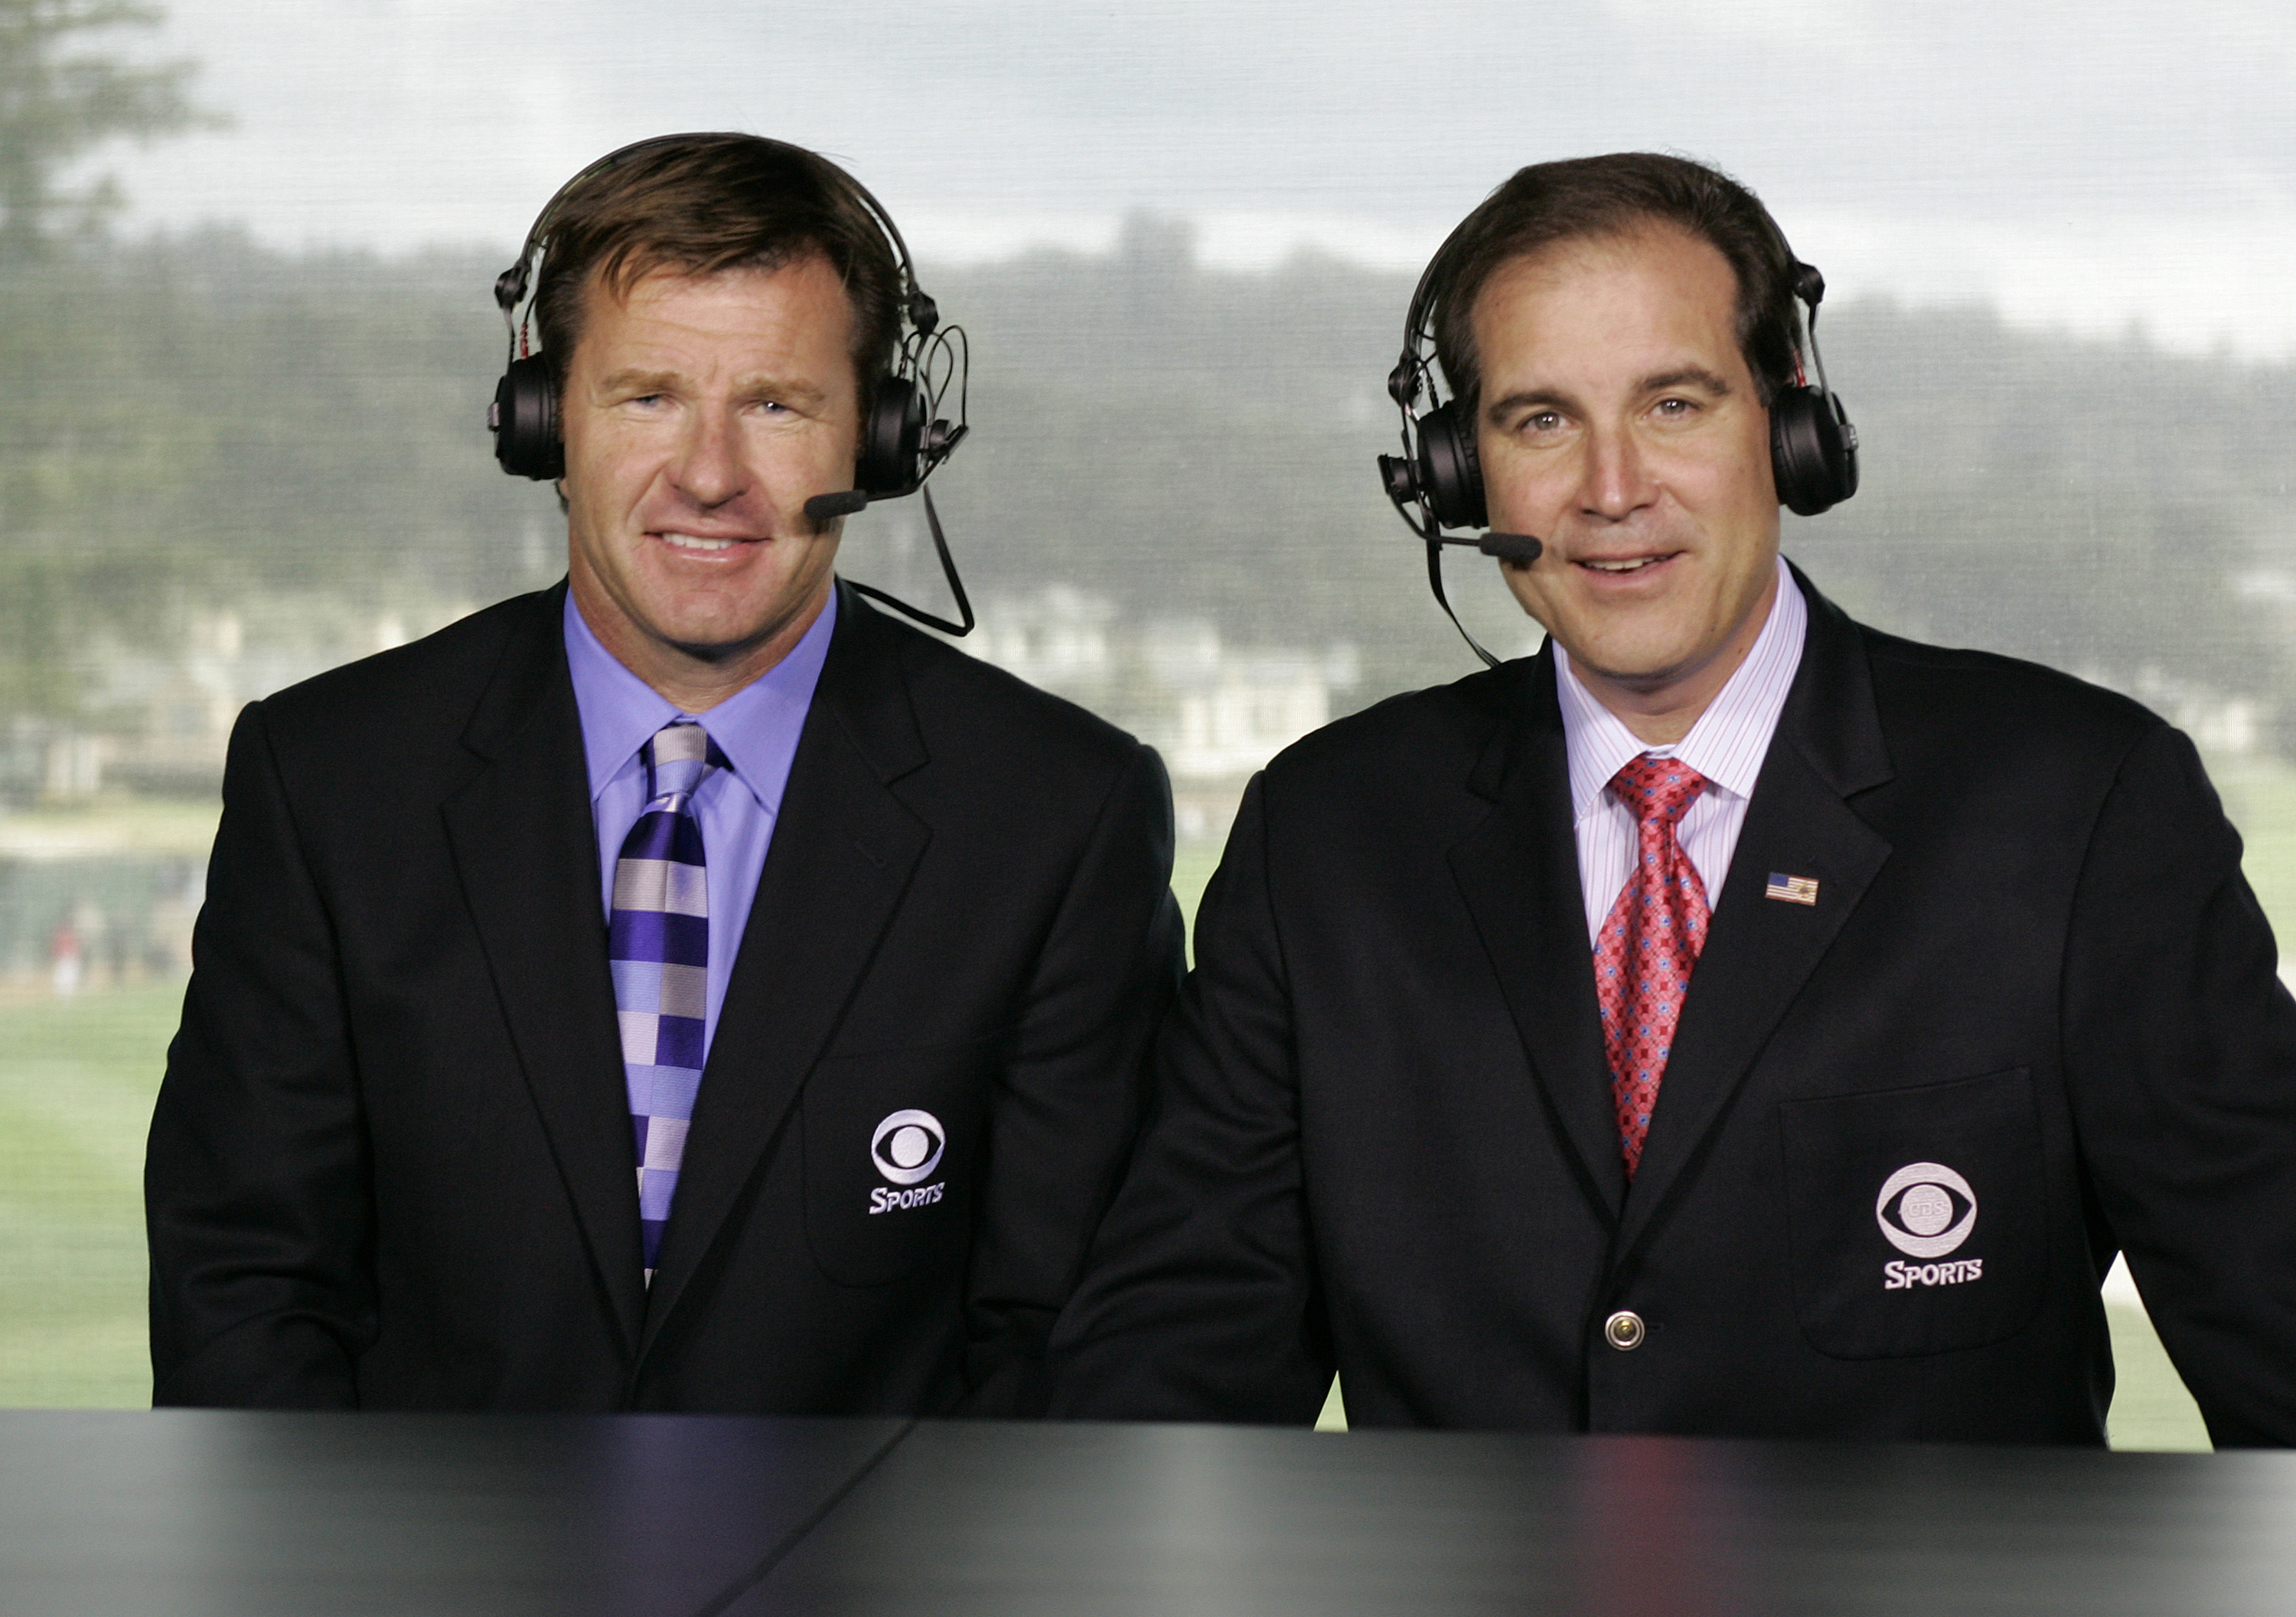 PGA Tour Reading Between the Lines of TV Analysts and Commentators